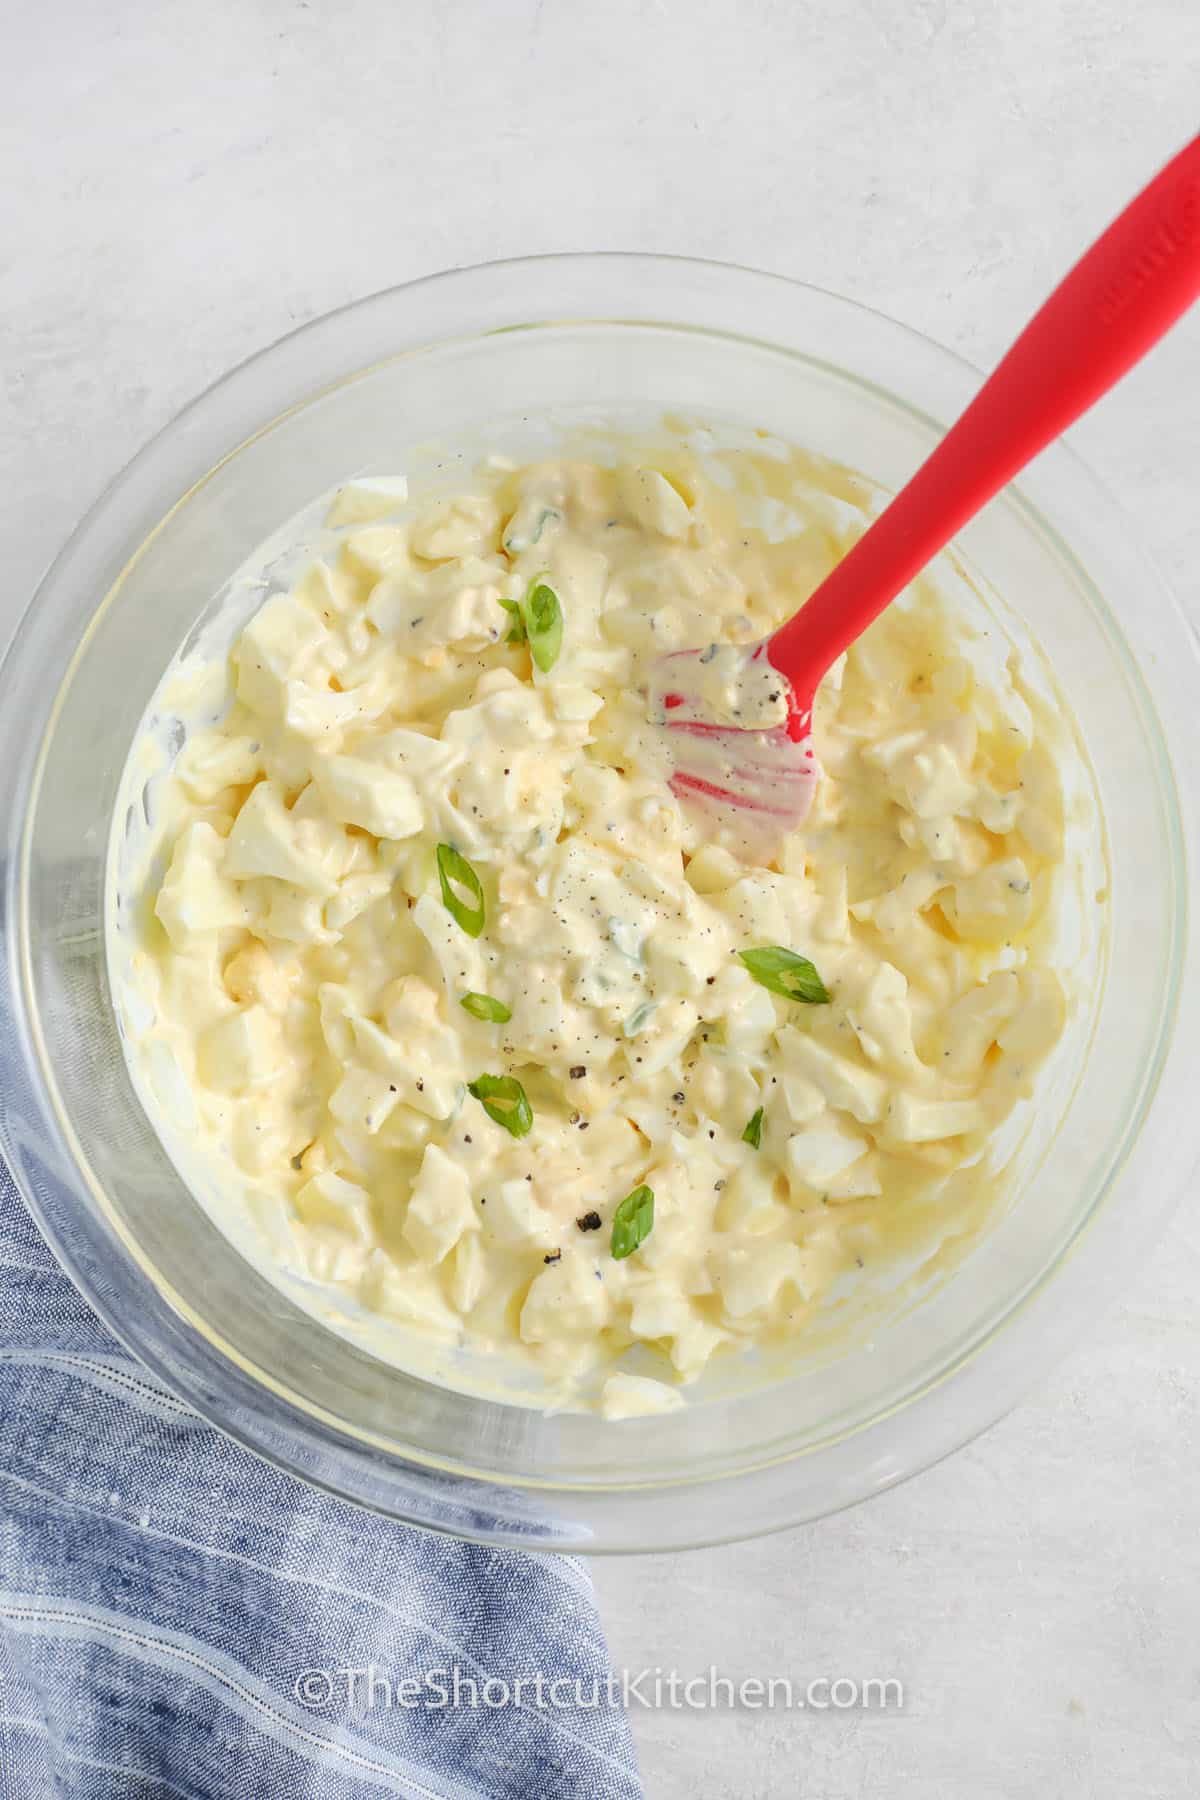 the best egg salad recipe in a small clear bowl, and garnished with sliced green onion